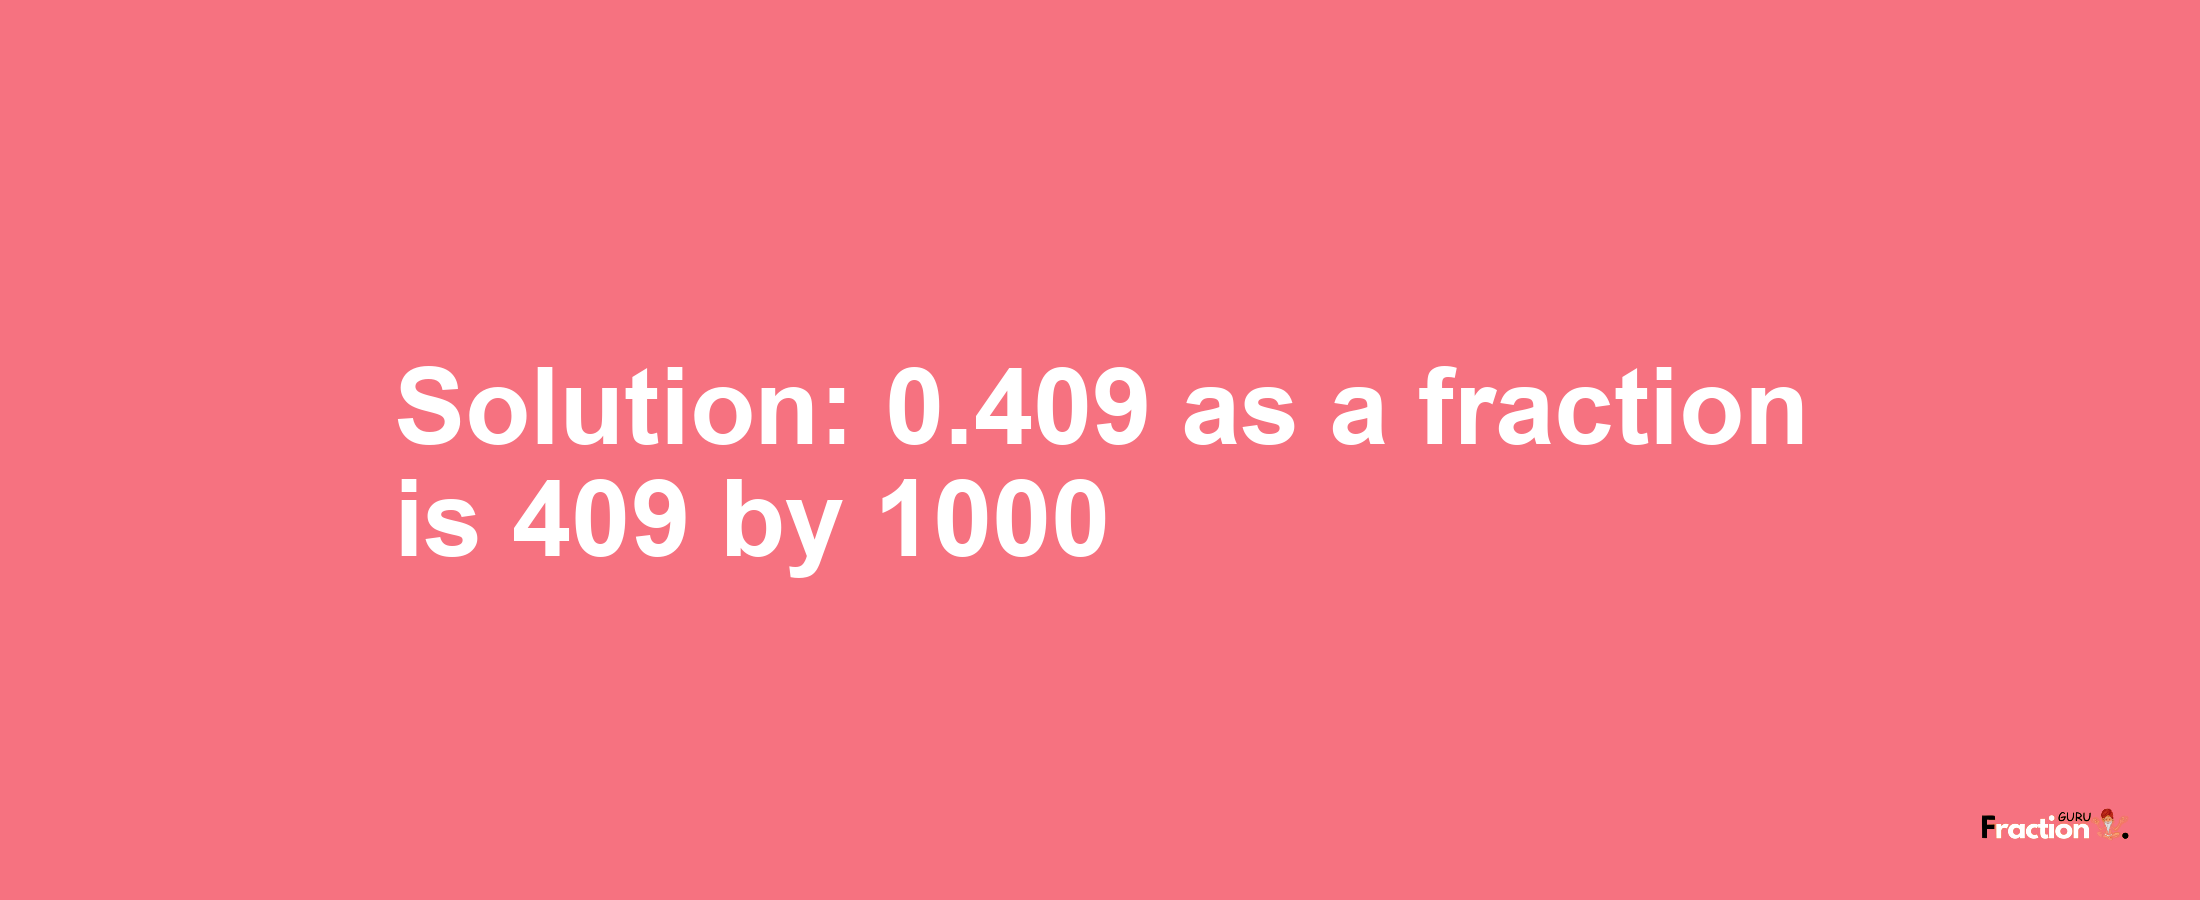 Solution:0.409 as a fraction is 409/1000